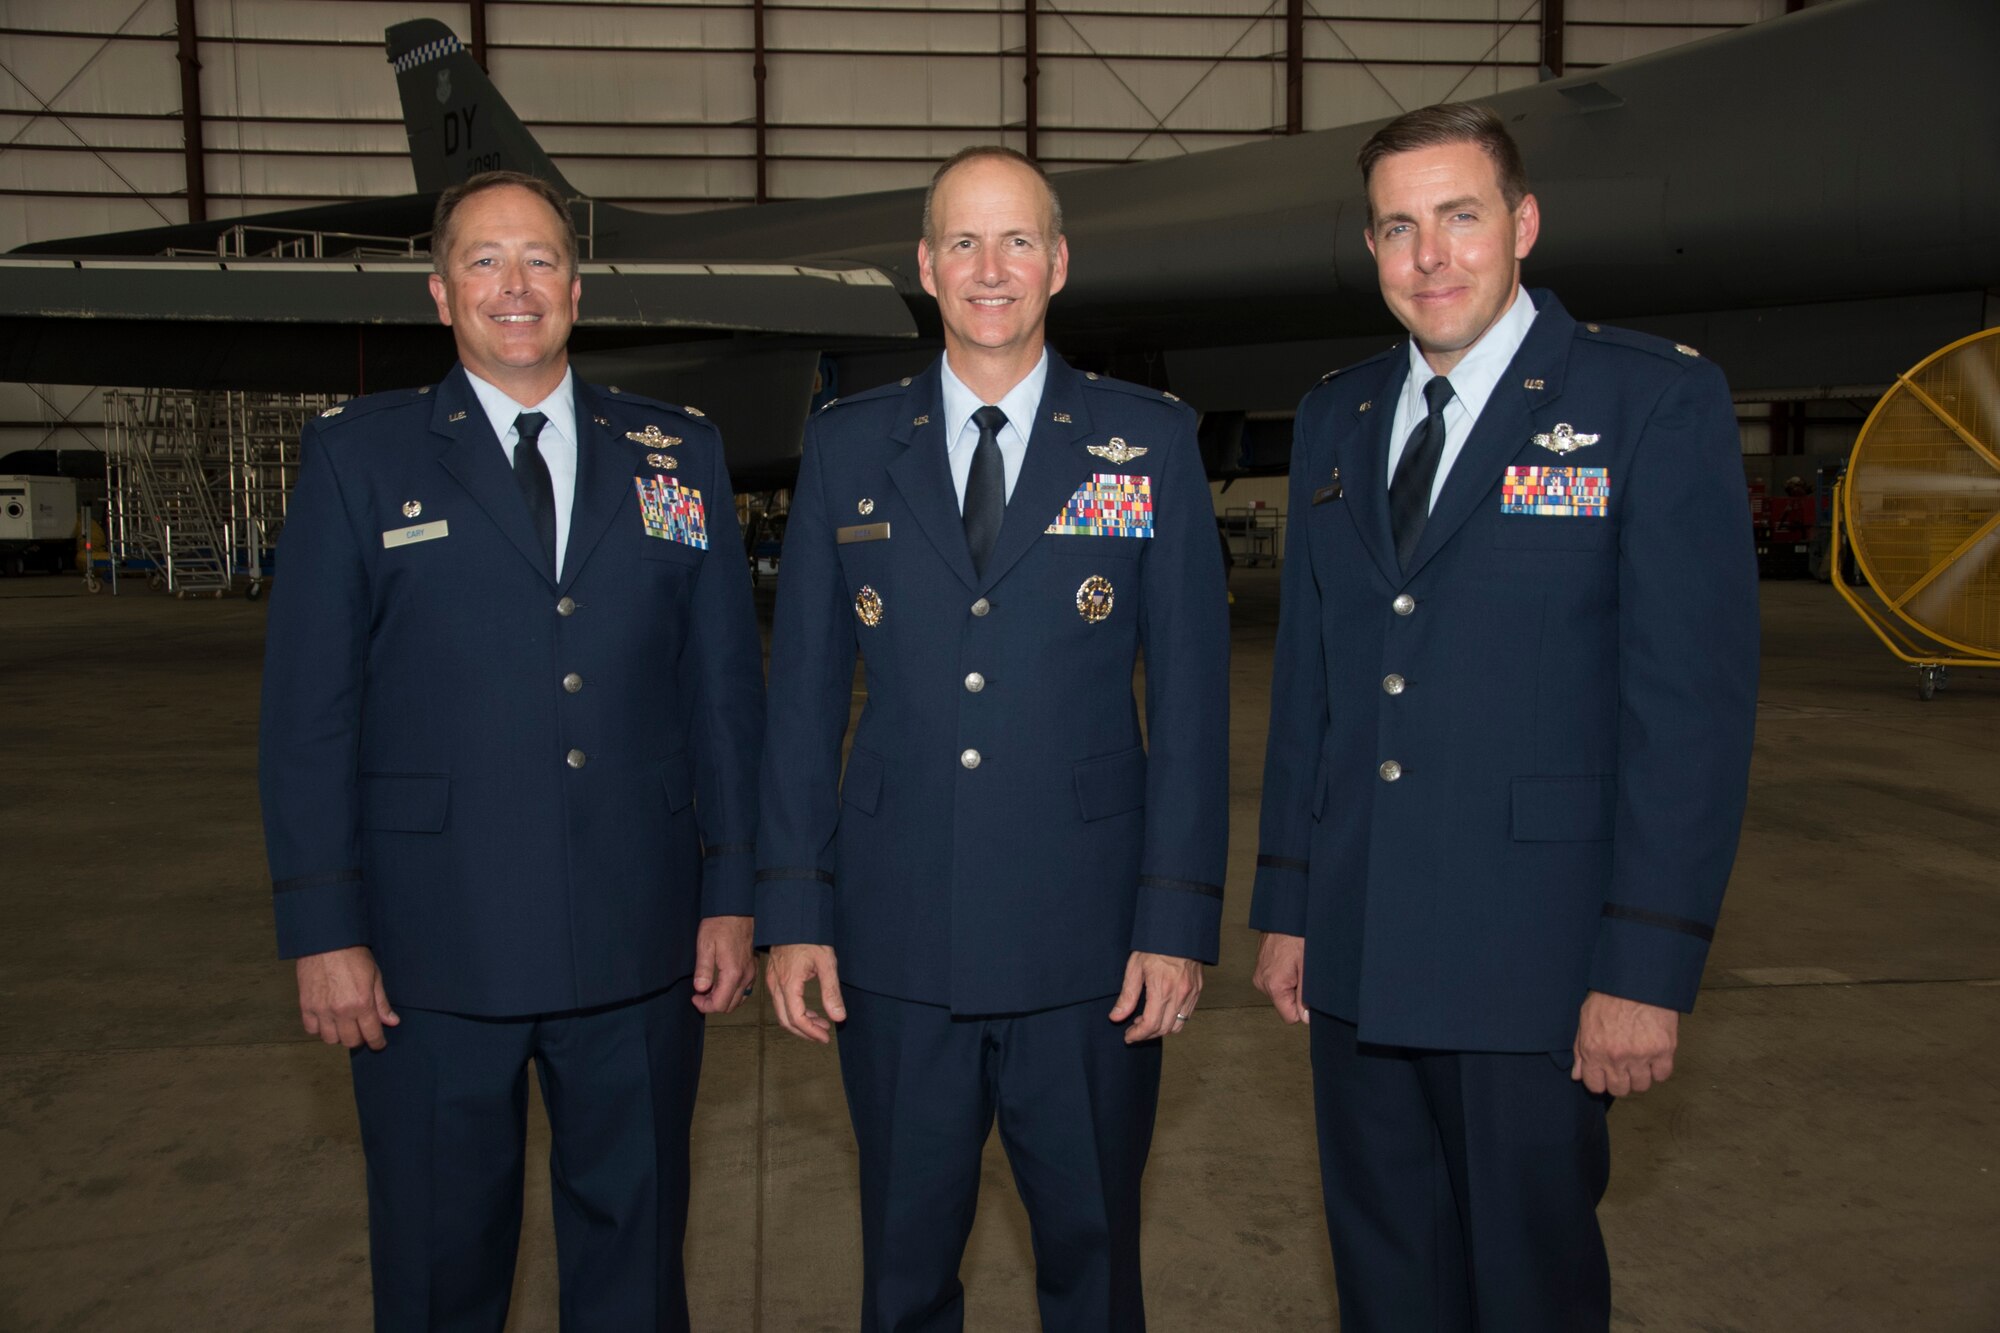 Senior officers gather following the 10th Flight Test Squadron change of command ceremony June 28, 2019, Tinker Air Force Base, Oklahoma. From left to right are: Lt. Col. Jon D. Cary, 10th FLTS outgoing commander, Col. Christopher M. Zidek, commander of the 413th Flight Test Group and Lt. Col. James T. Couch, incoming 10th FLTS commander. (U.S. Air Force photo/Greg L. Davis)